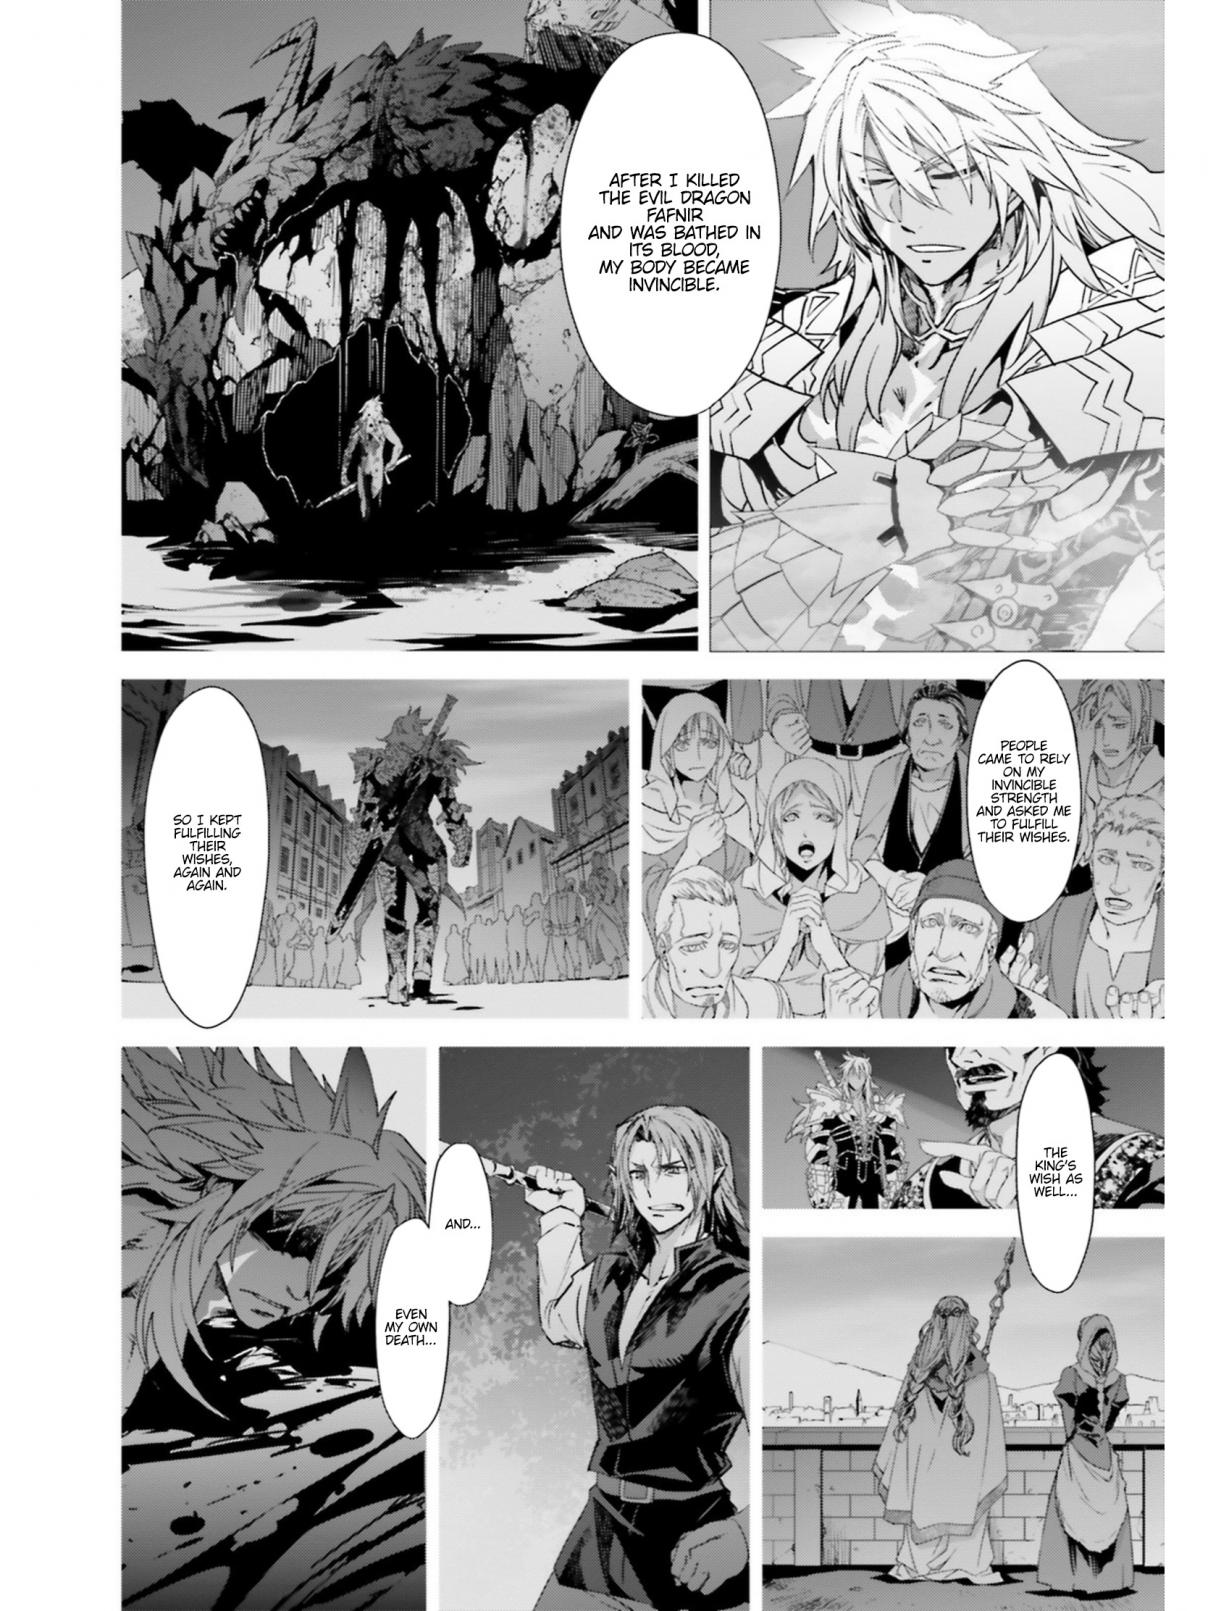 Fate/Apocrypha Ch. 25 Episode